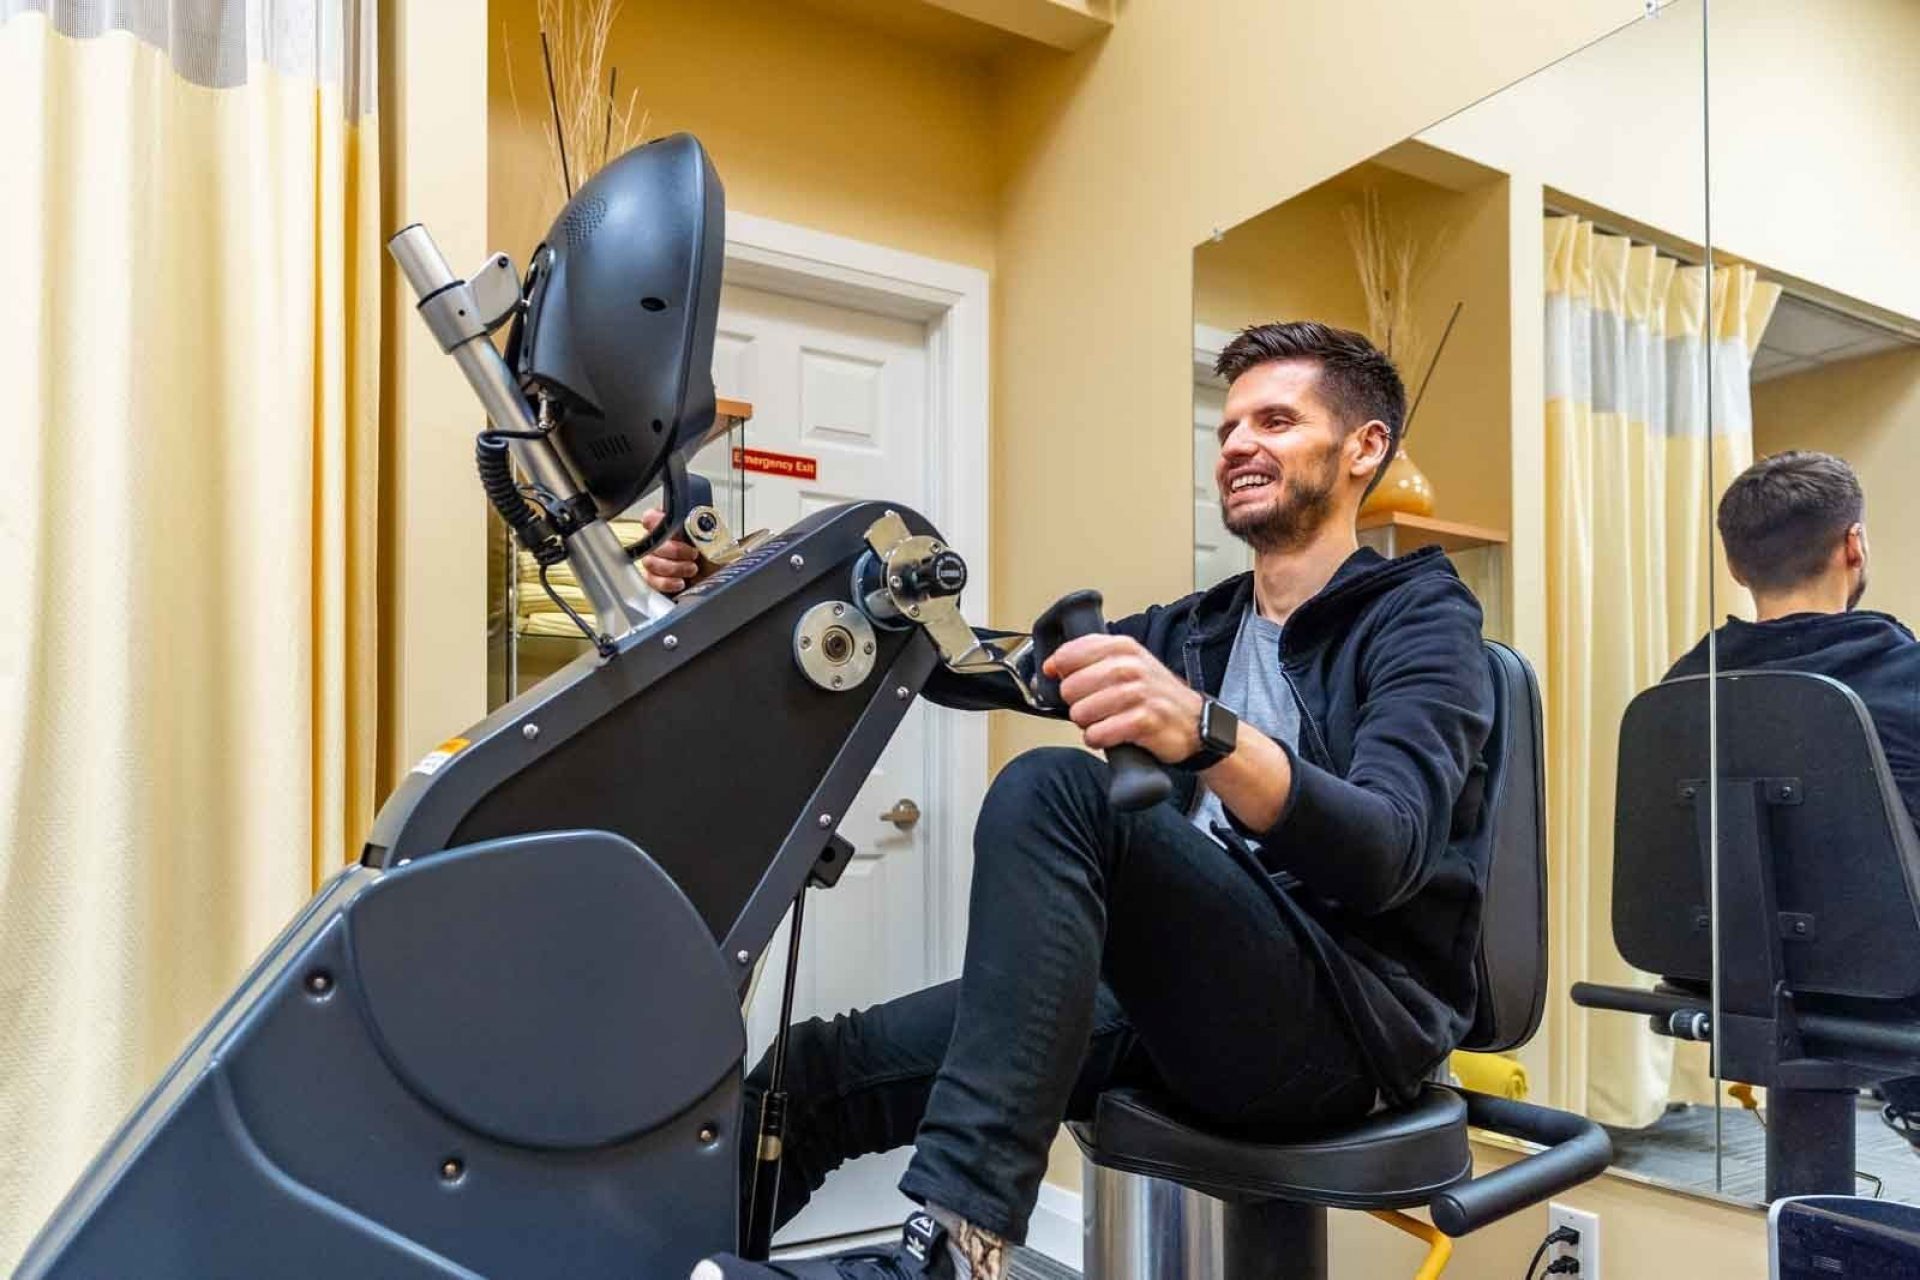 A man rides an exercise bike at Advance Physiotherapy Clinic